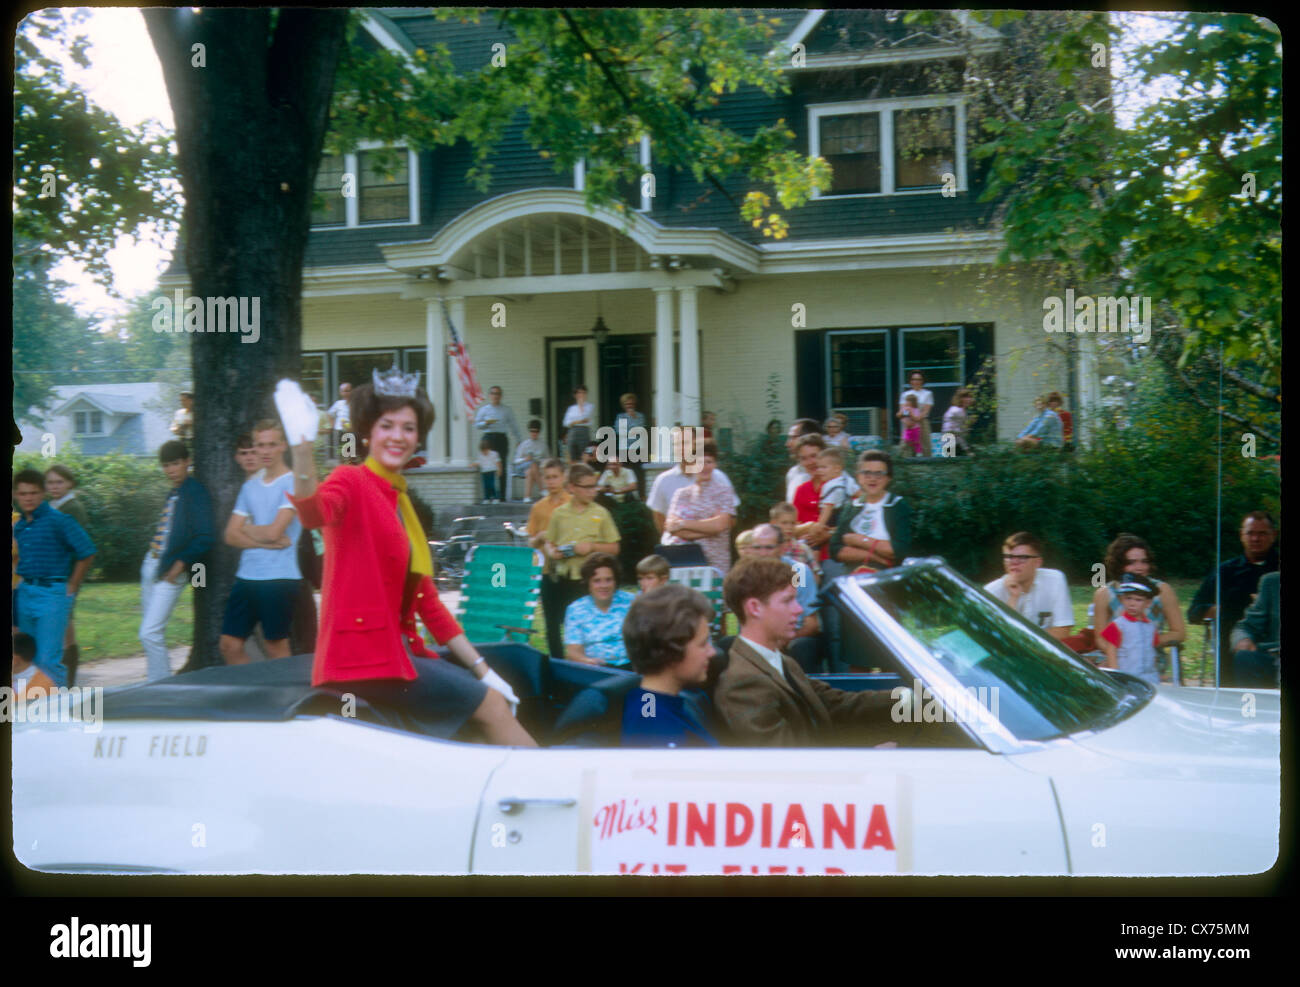 Miss Indiana Kit Field waving beauty queen fall festival martinsville indiana 1968 autumn parade Stock Photo